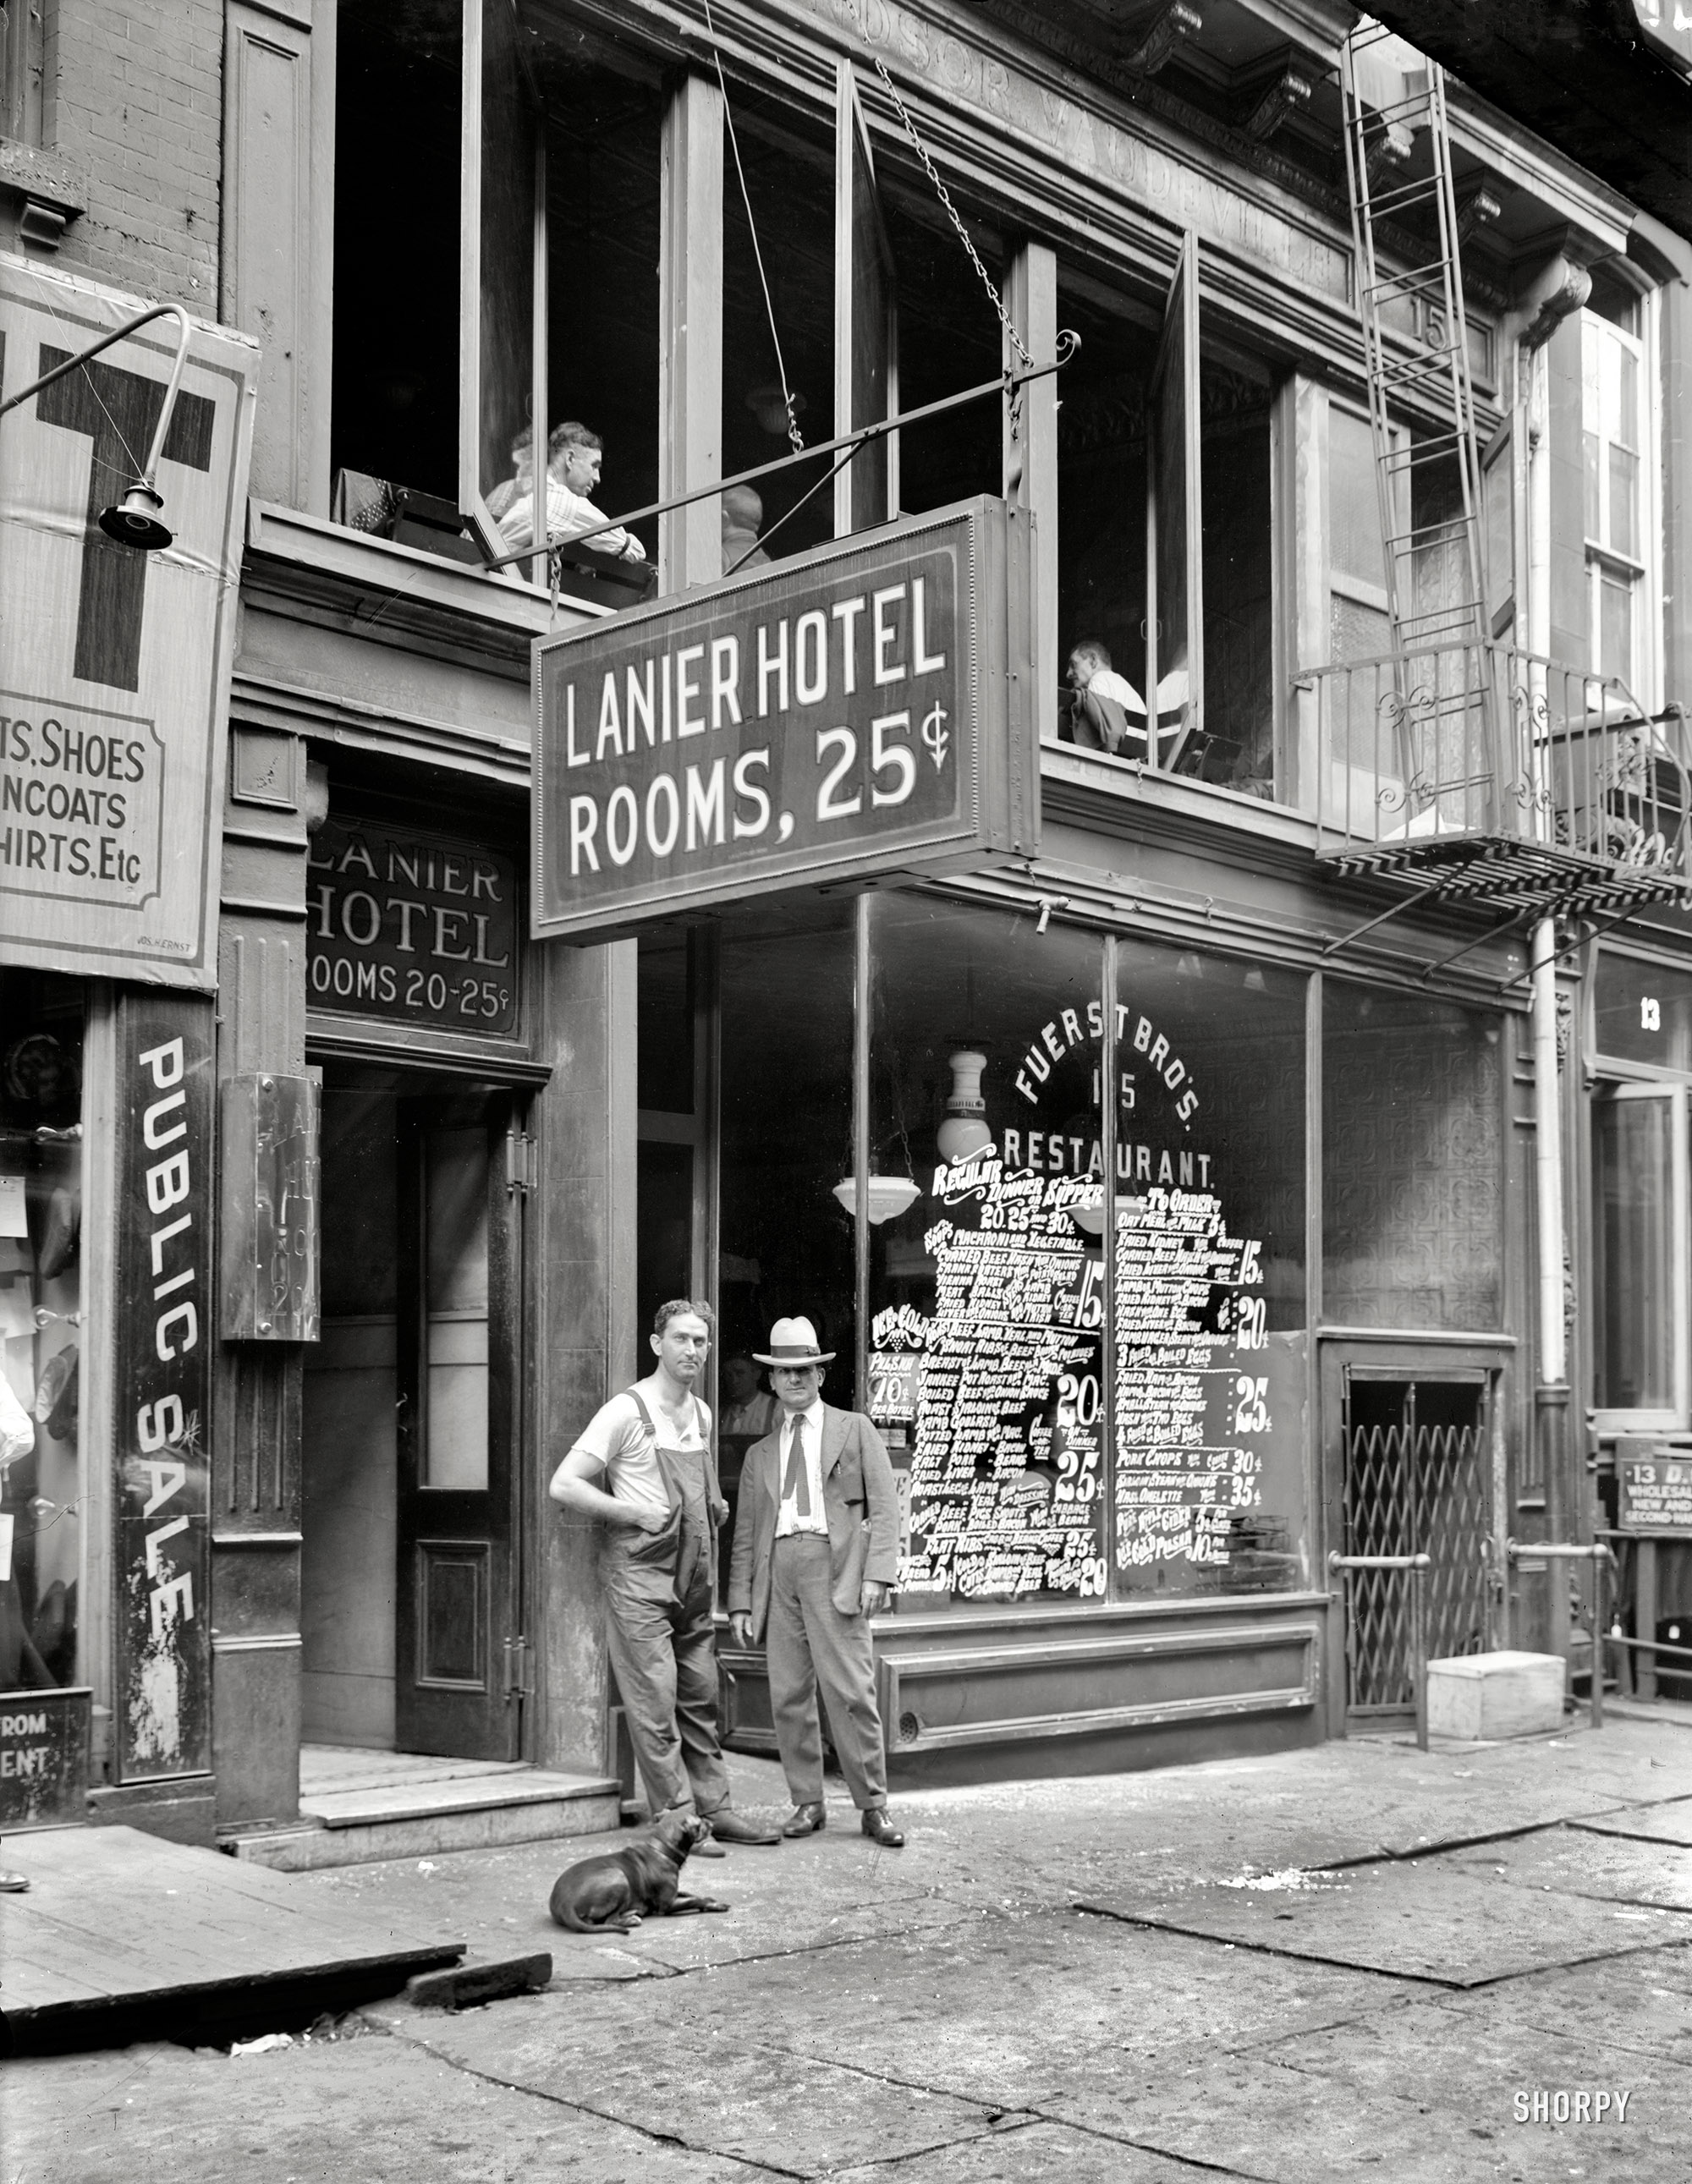 New York, July 5, 1921. "Lanier Hotel -- Rooms 25 cents." From the clues provided in the photo, who can pinpoint the location of this fleabag hostelry? 5x7 glass negative, George Grantham Bain Collection. View full size.